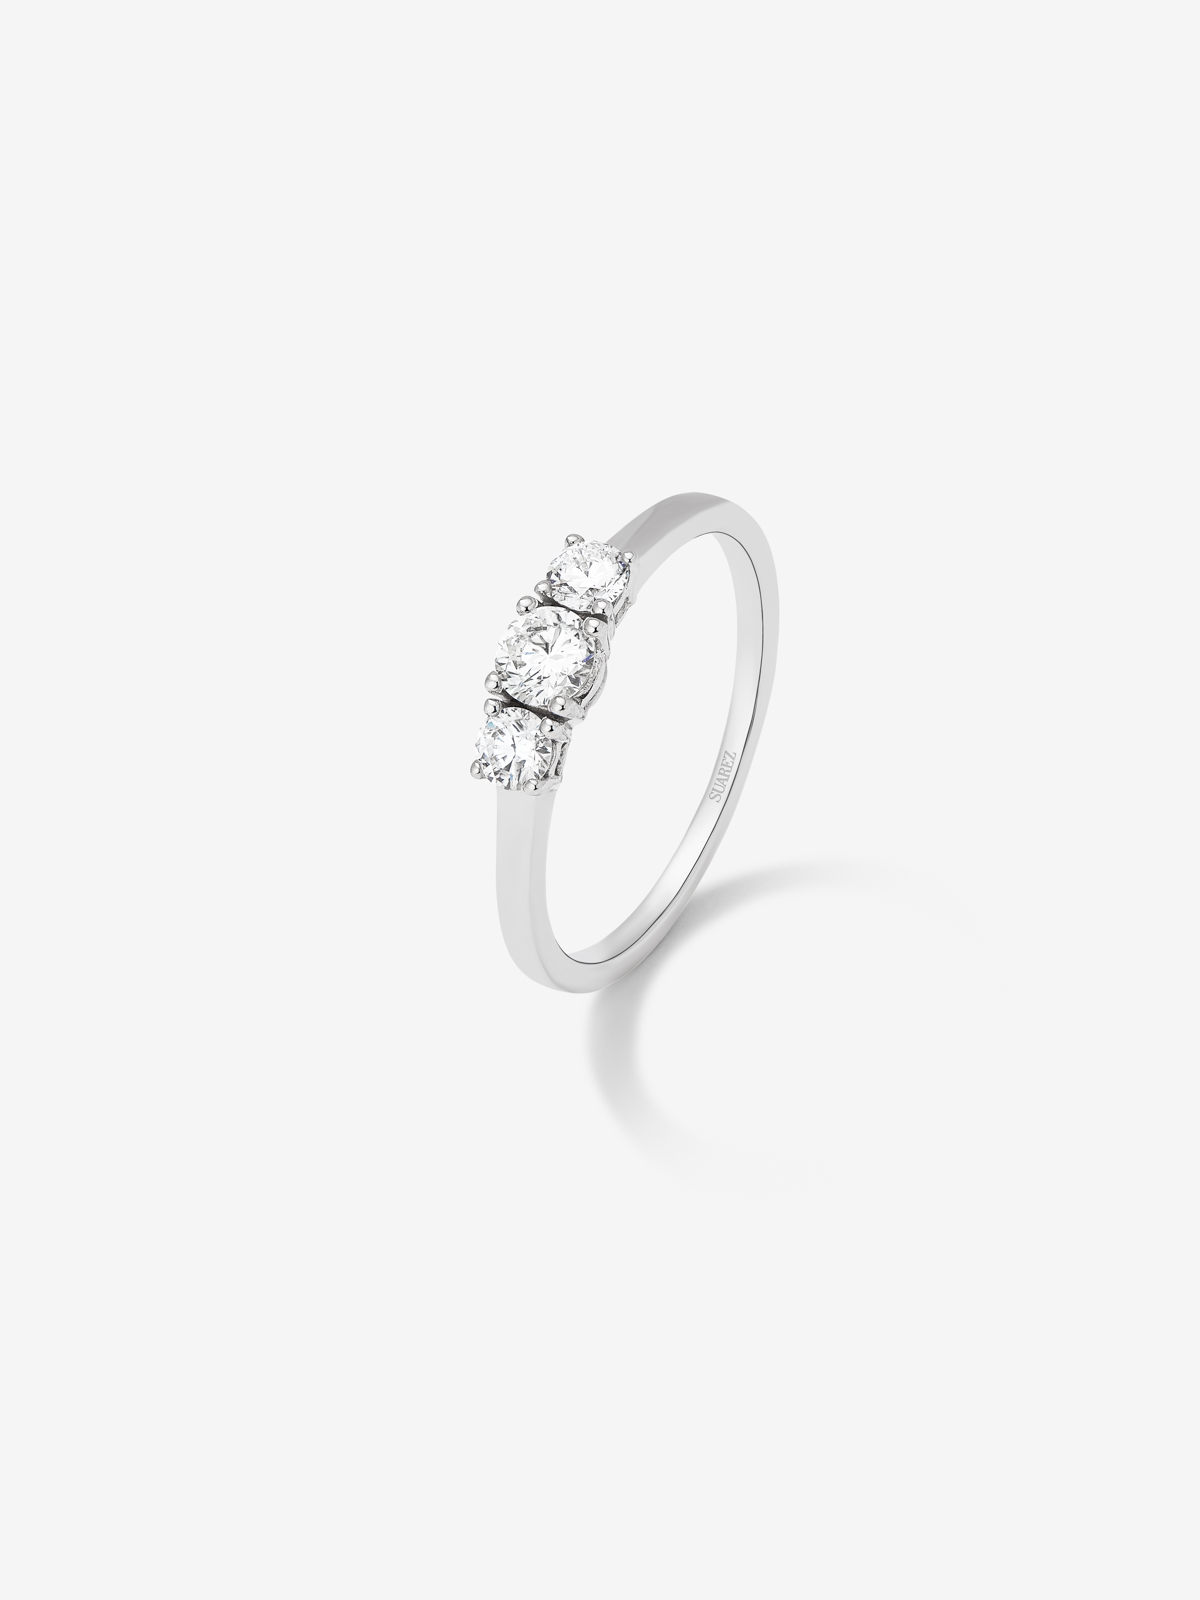 18K White Gold Doing Ring with white 0.45 cts bright diamonds